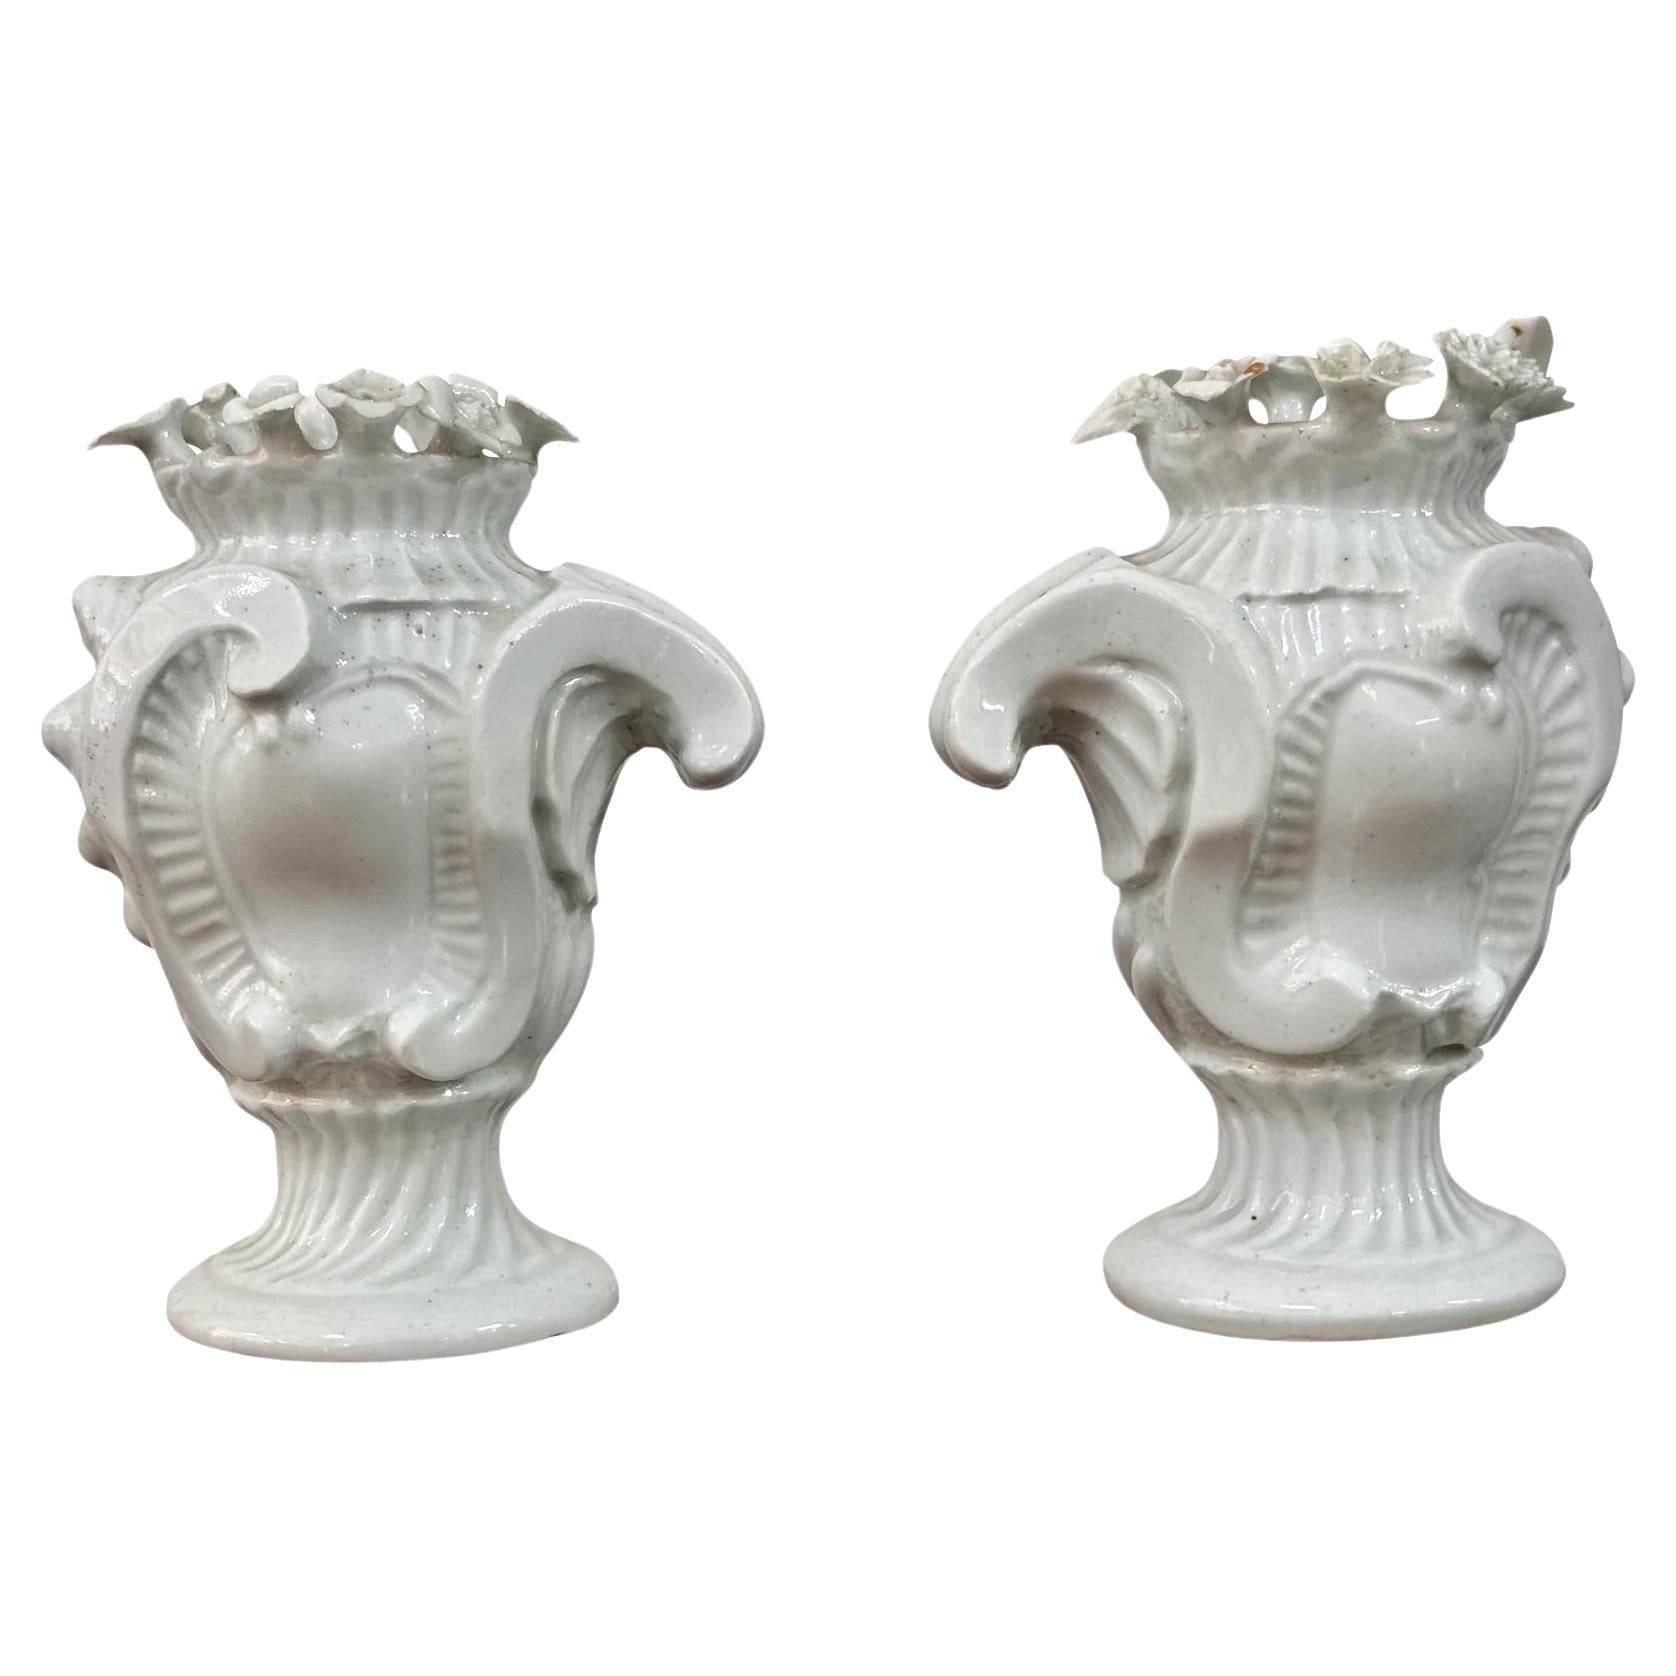 Rare pair of Longton Hall Flower-encrusted vases, c. 1755 For Sale